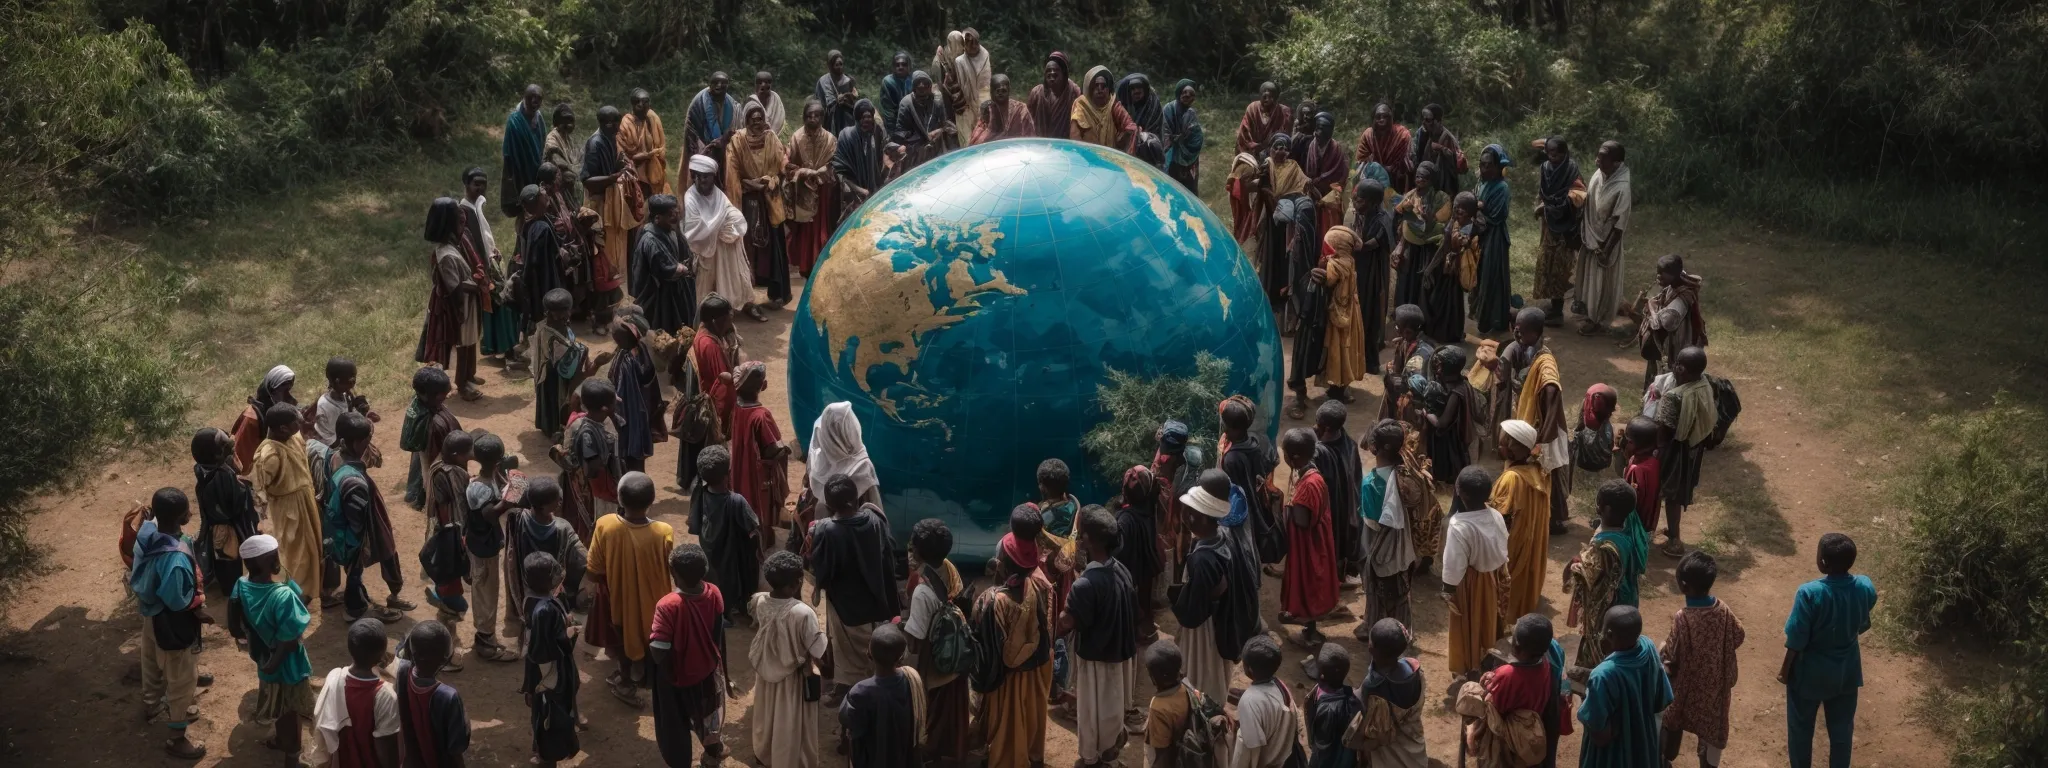 a diverse group of people from different countries gathers around a large, glowing globe, each interacting with it in their own way.